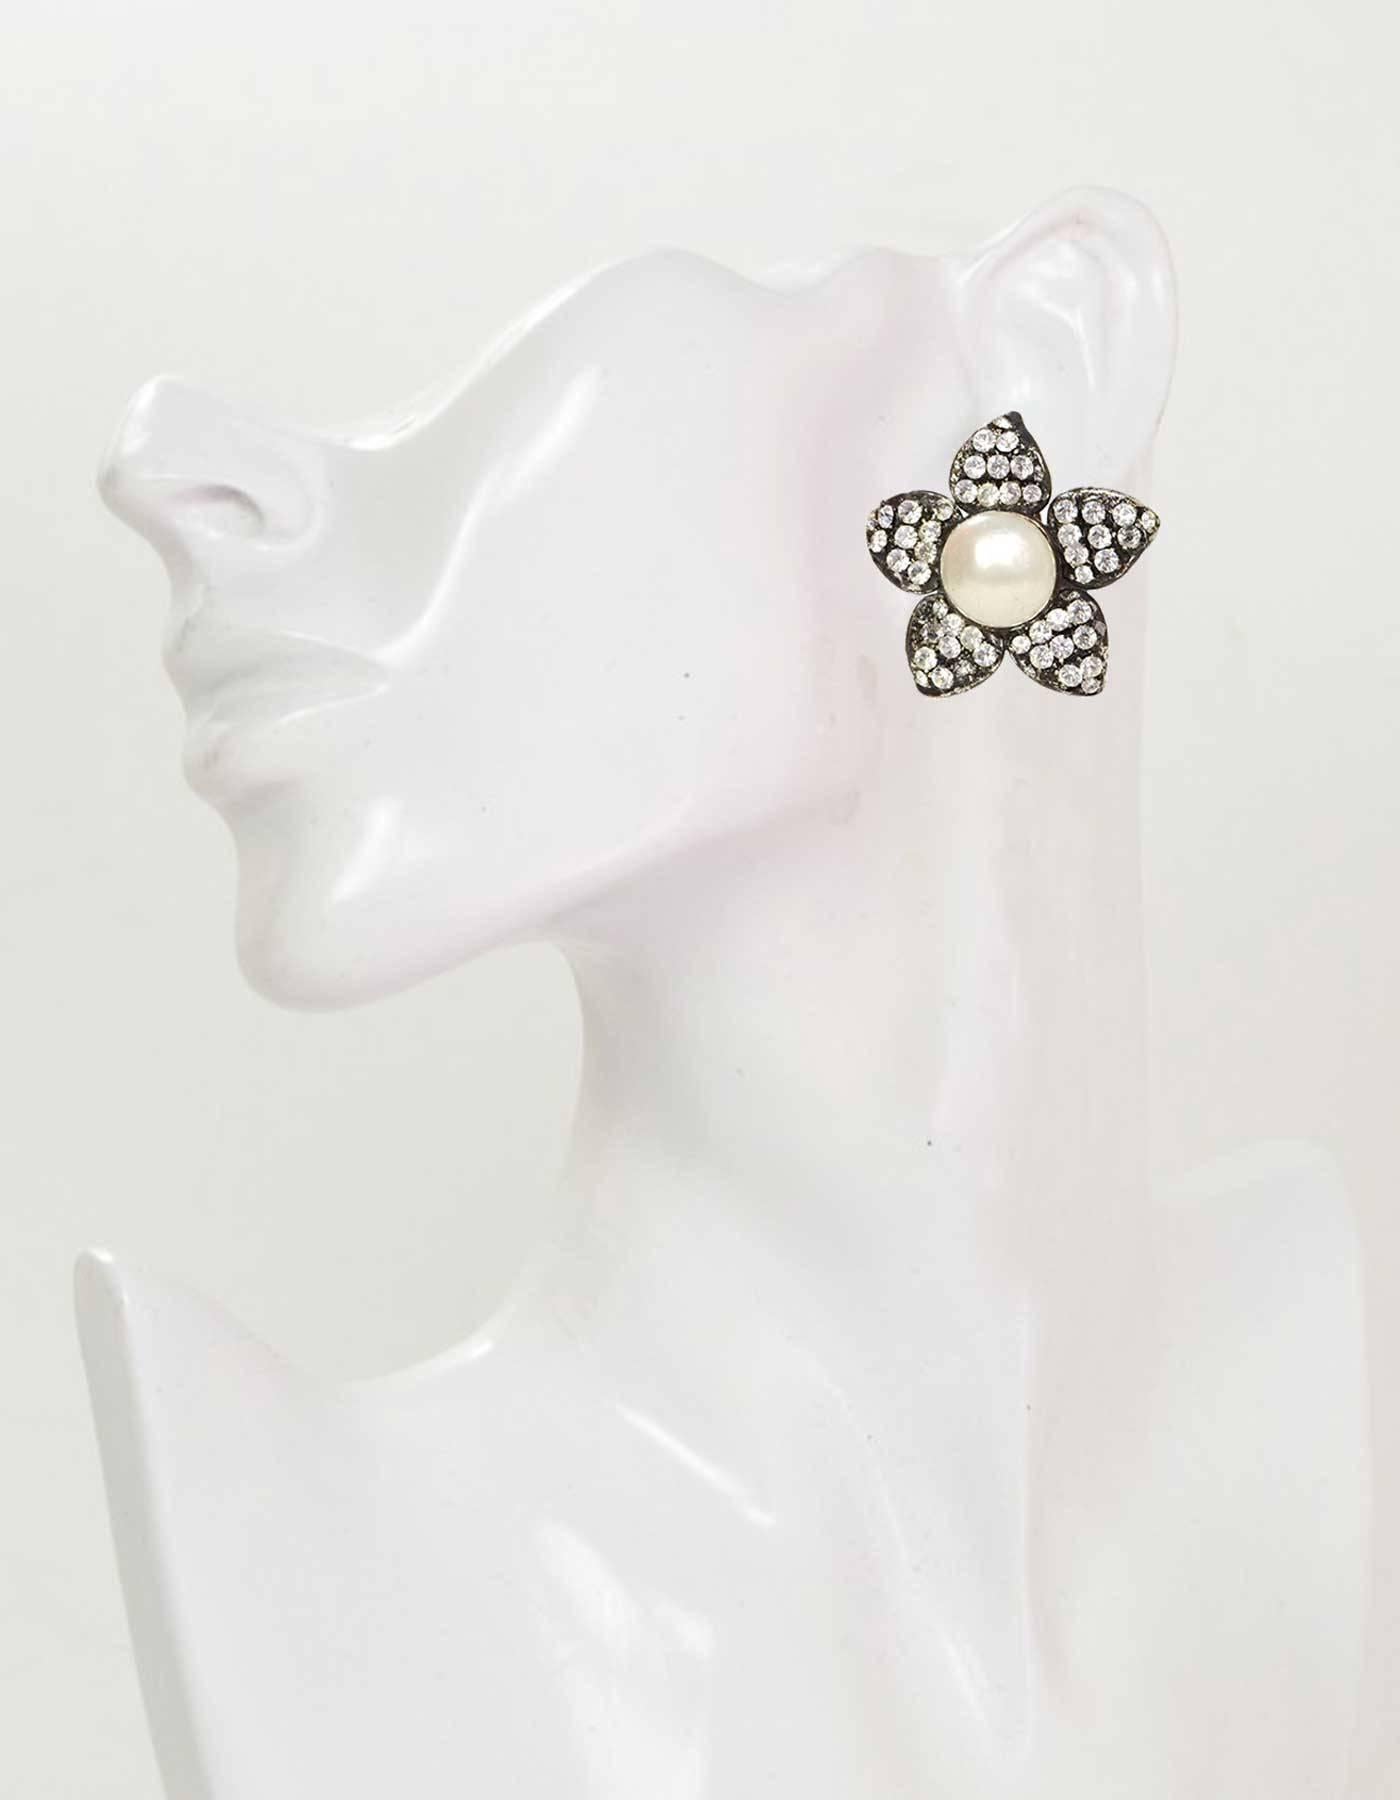 Chanel Vintage '70s Crystal & Pearl Flower Clip On Earrings 

Made In: France
Year of Production: 1970's
Color: Oxidized silvertone and ivory
Materials: Metal, faux pearl and crystal
Closure: Clip on
Stamp: Chanel CC Made in France
Overall